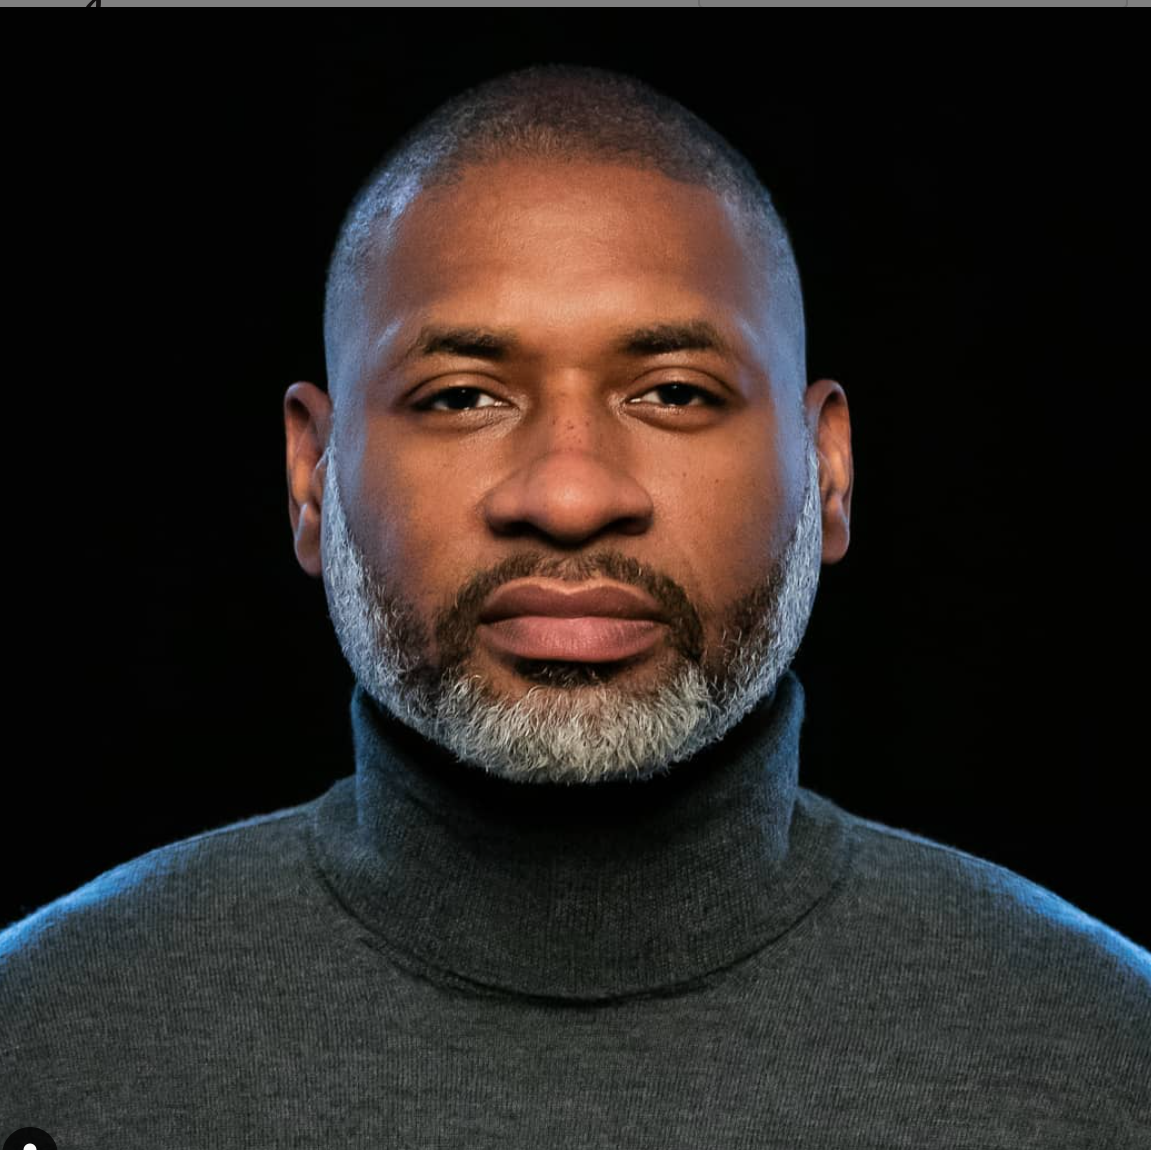 Image of Charles M Blow with a black background wearing a dark turtle neck and looking intently into the camera.